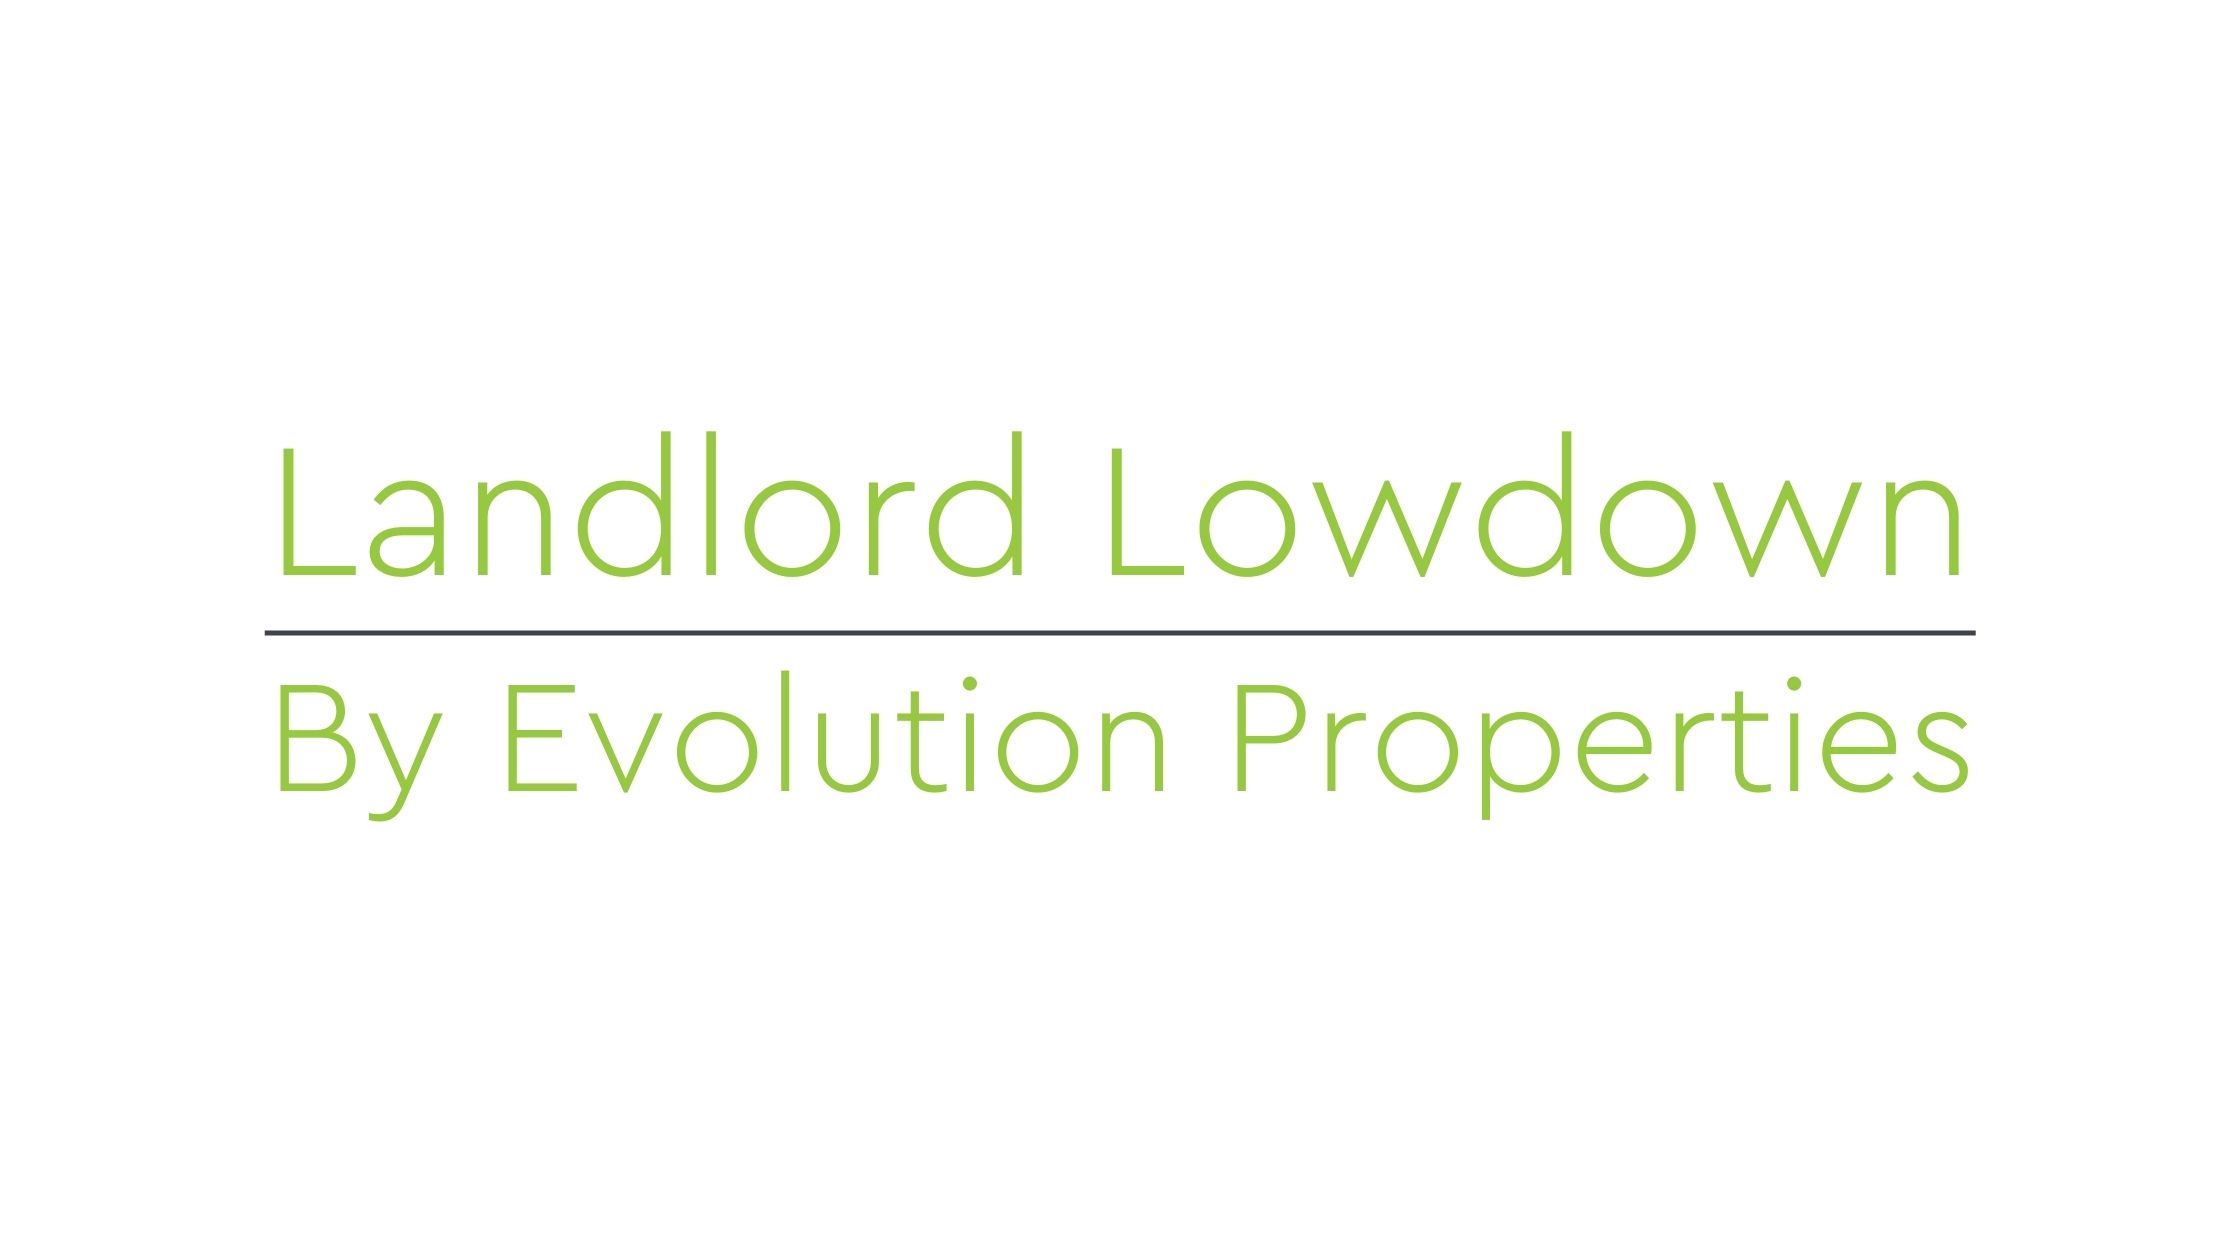 Landlord Lowdown - Switching to a managed service